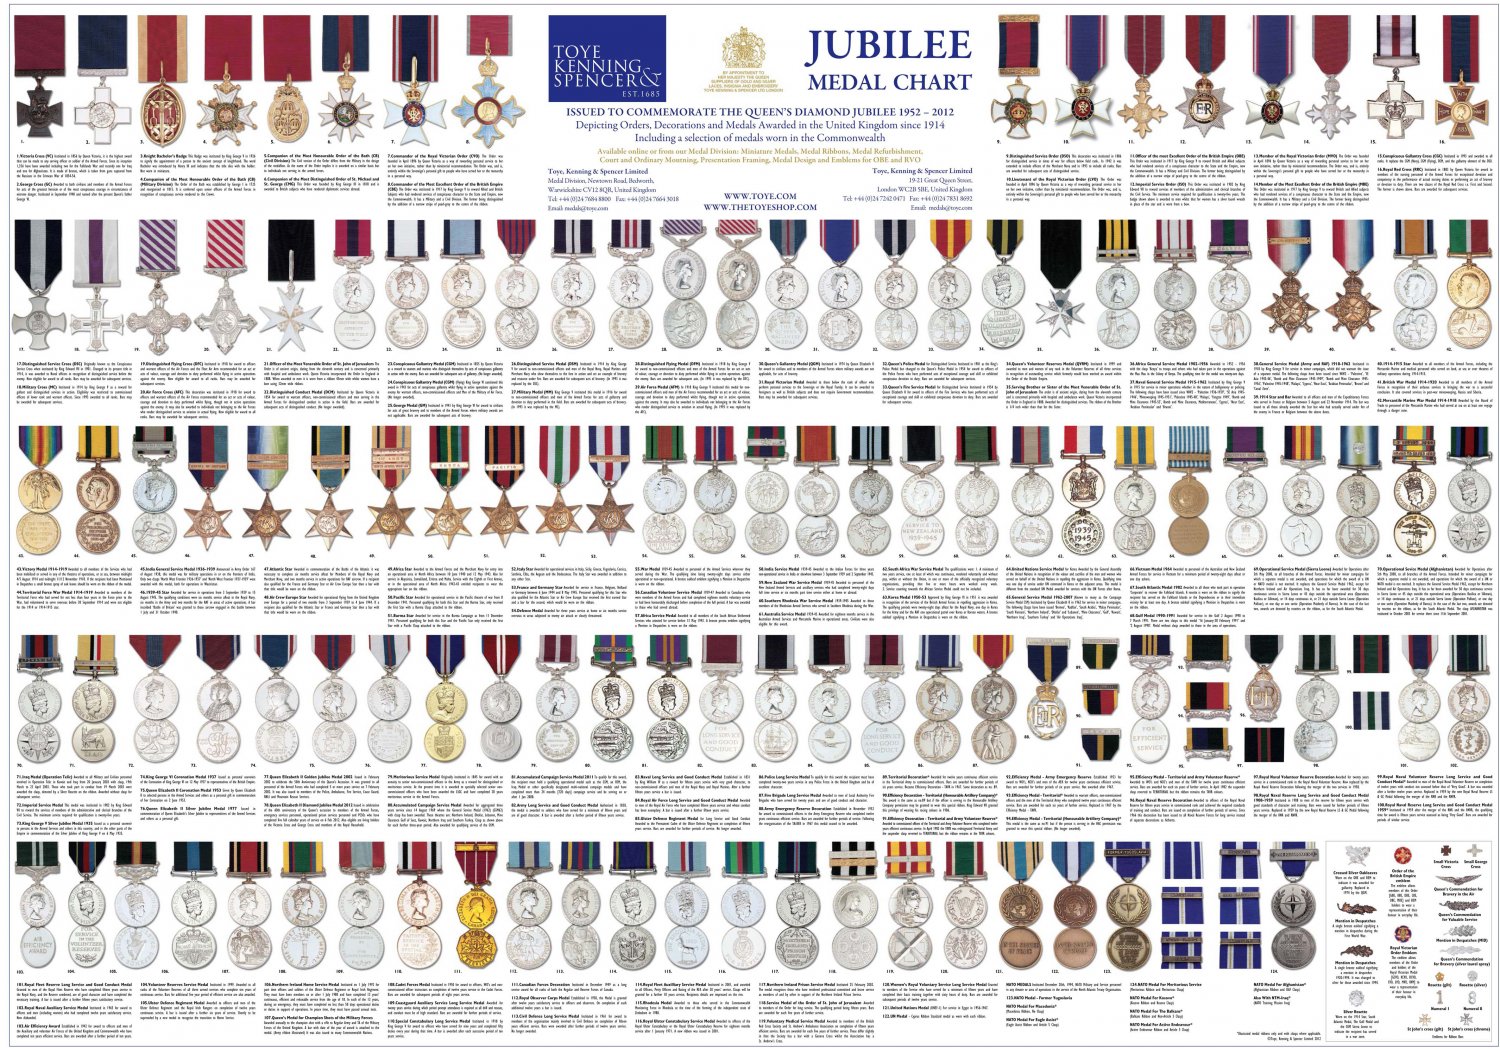 Jubilee Medal Chart Infographic 18"x28" (45cm/70cm) Canvas Print